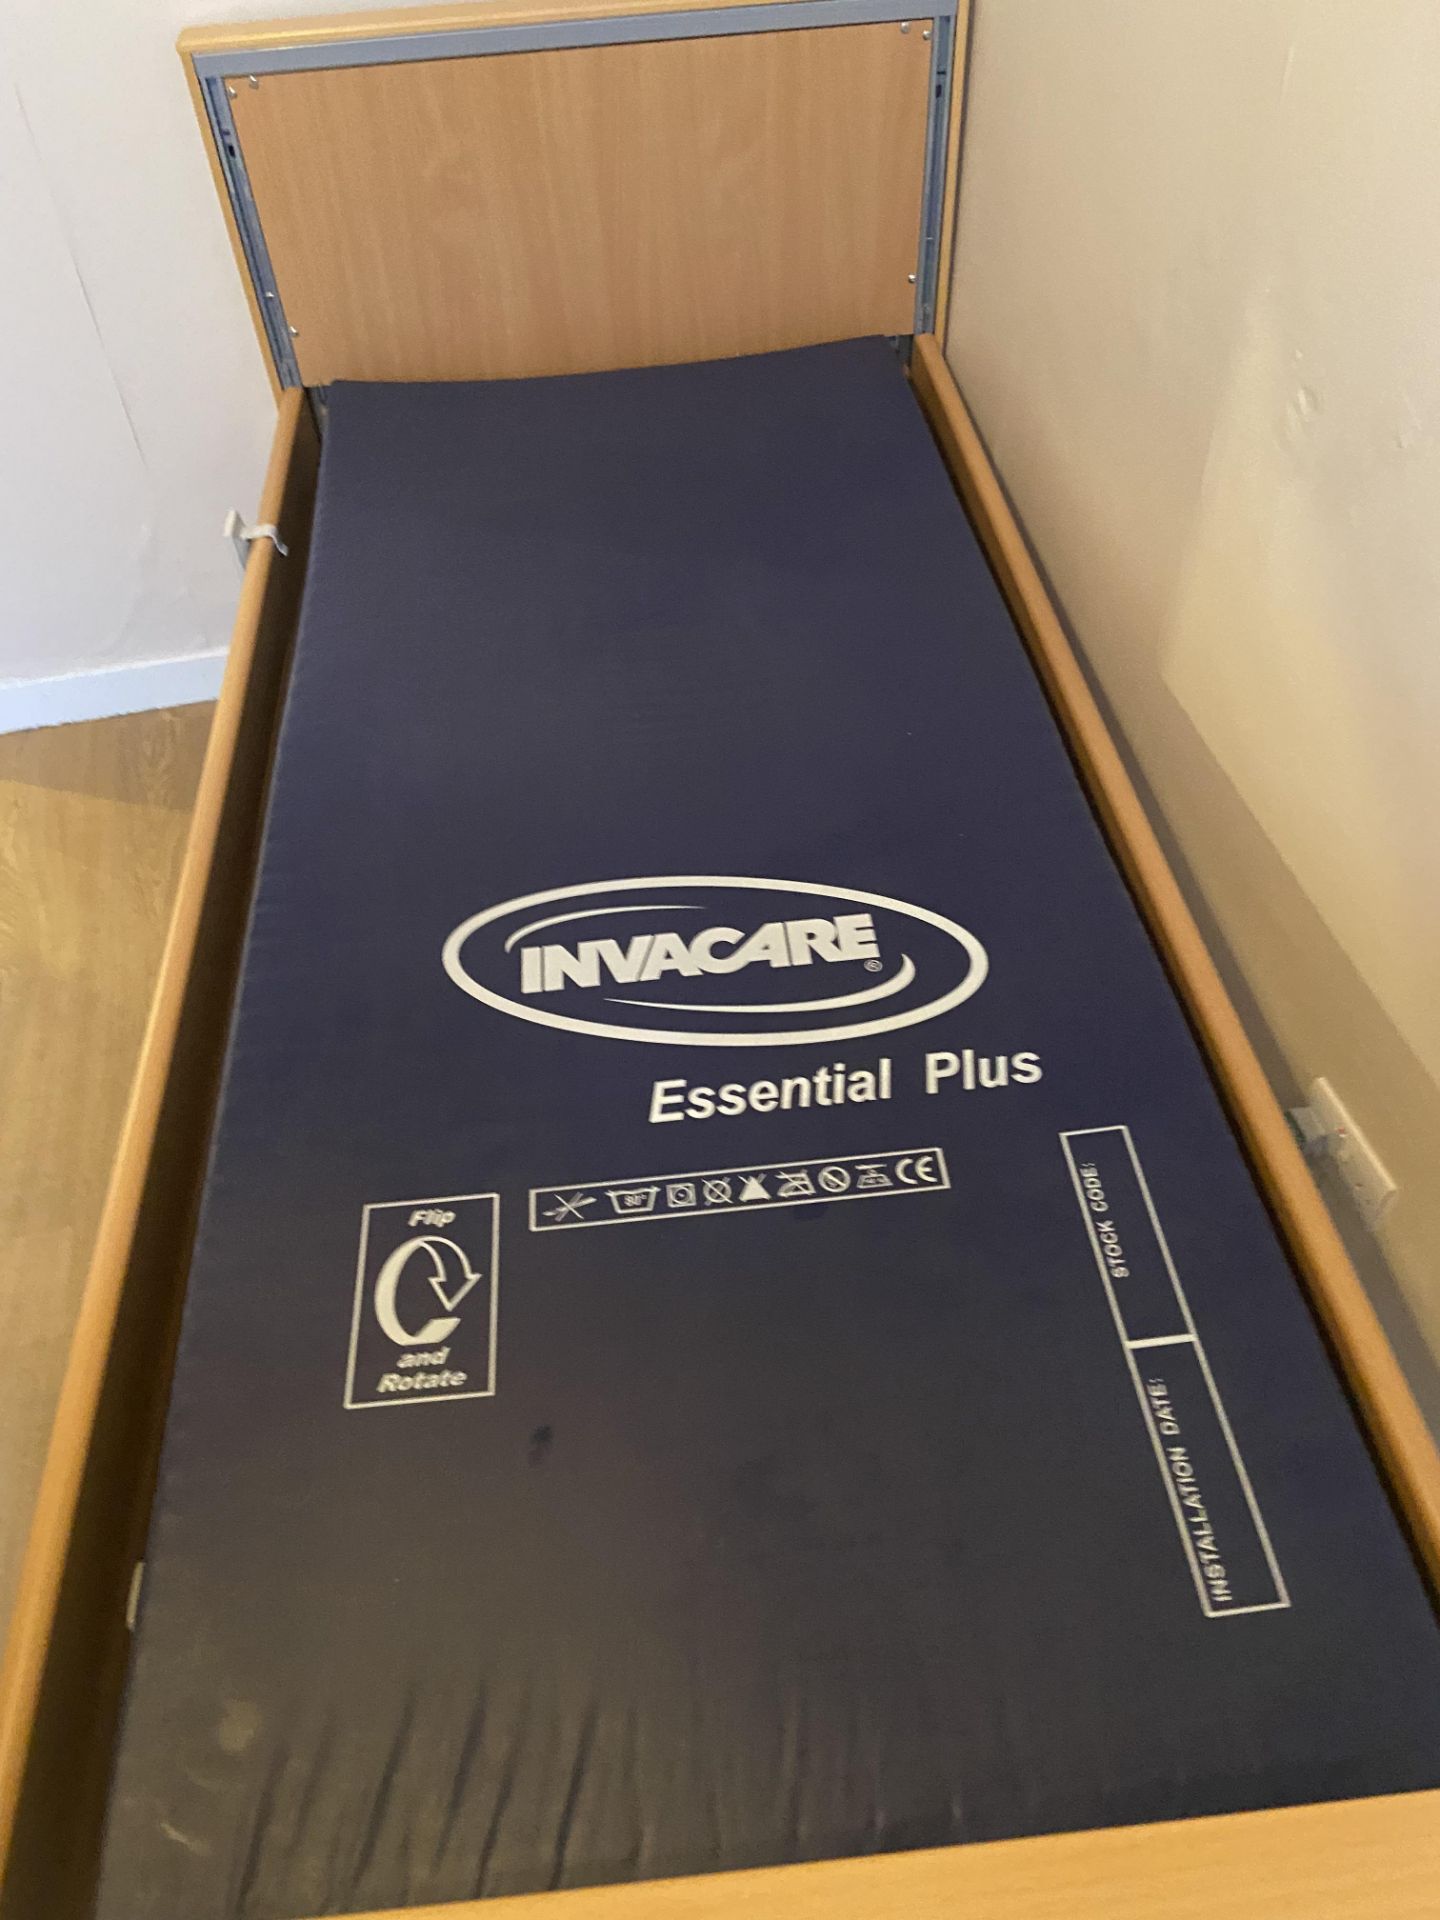 Invacare Mobile Adjustable Height Bed Frame, with Invacare essential plus mattress (Room 1) Please - Image 2 of 2